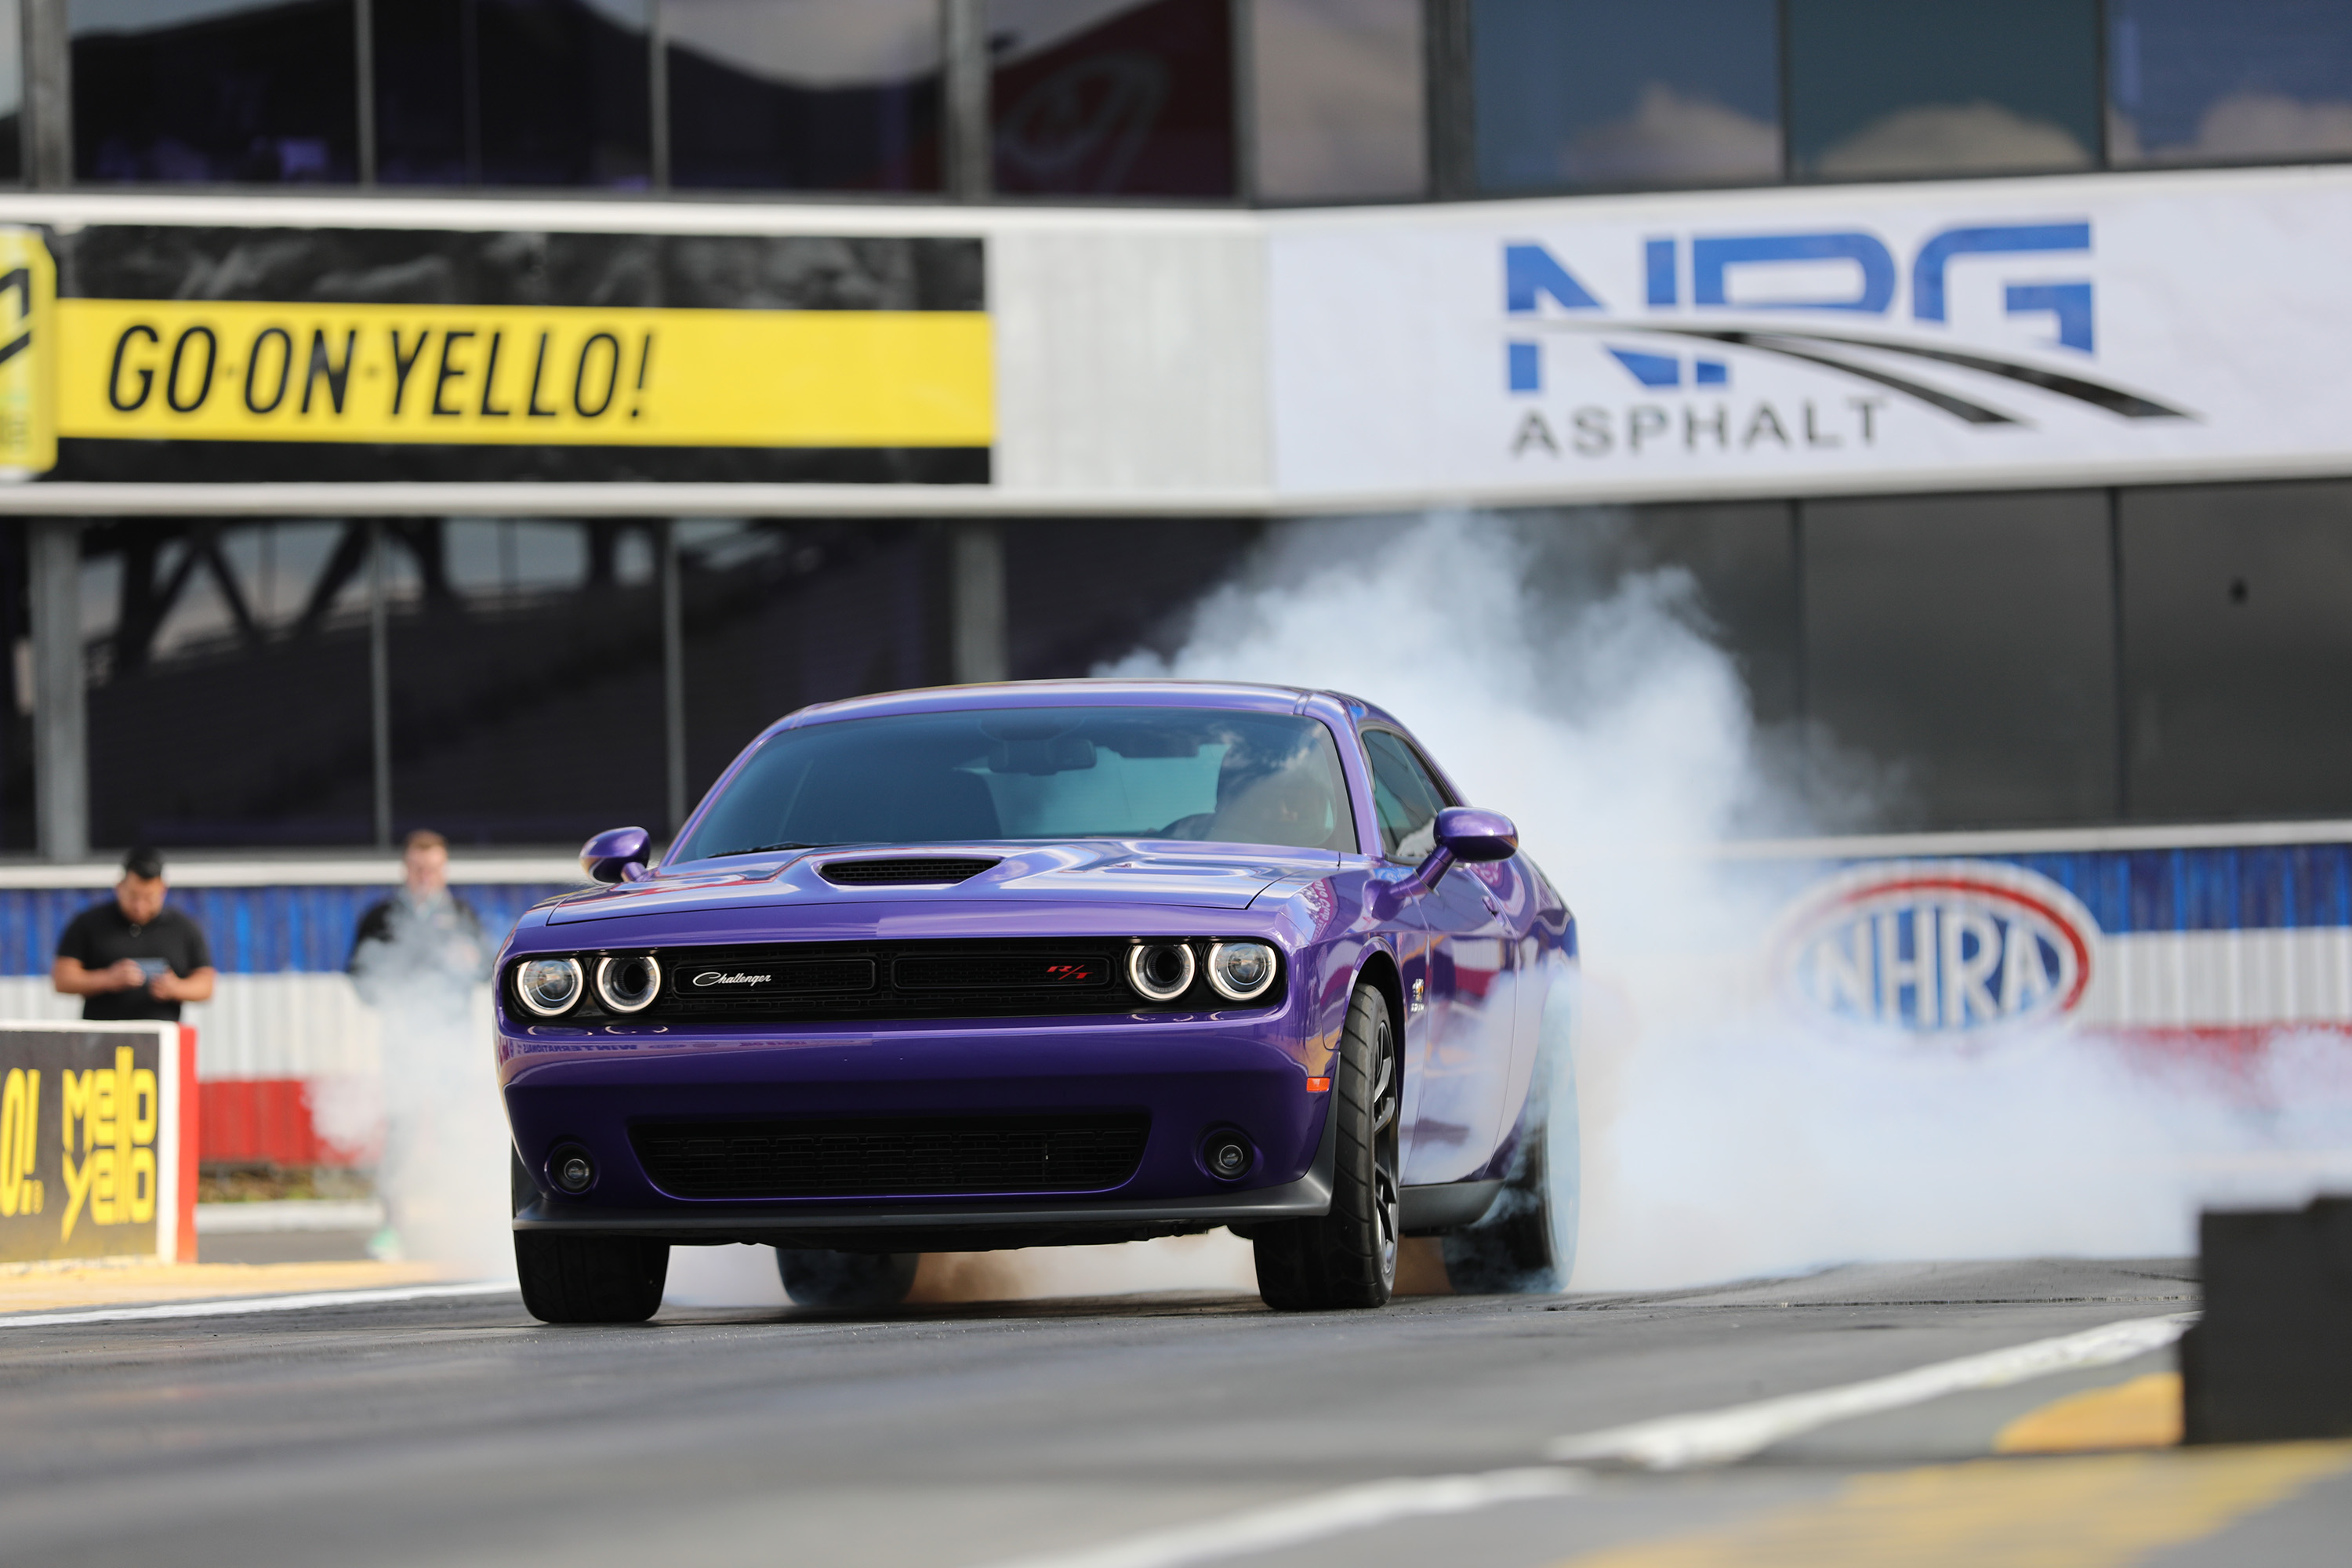 2019 Dodge Challenger R/T Scat Pack 1320 “Angry Bee” Approved for NHRA